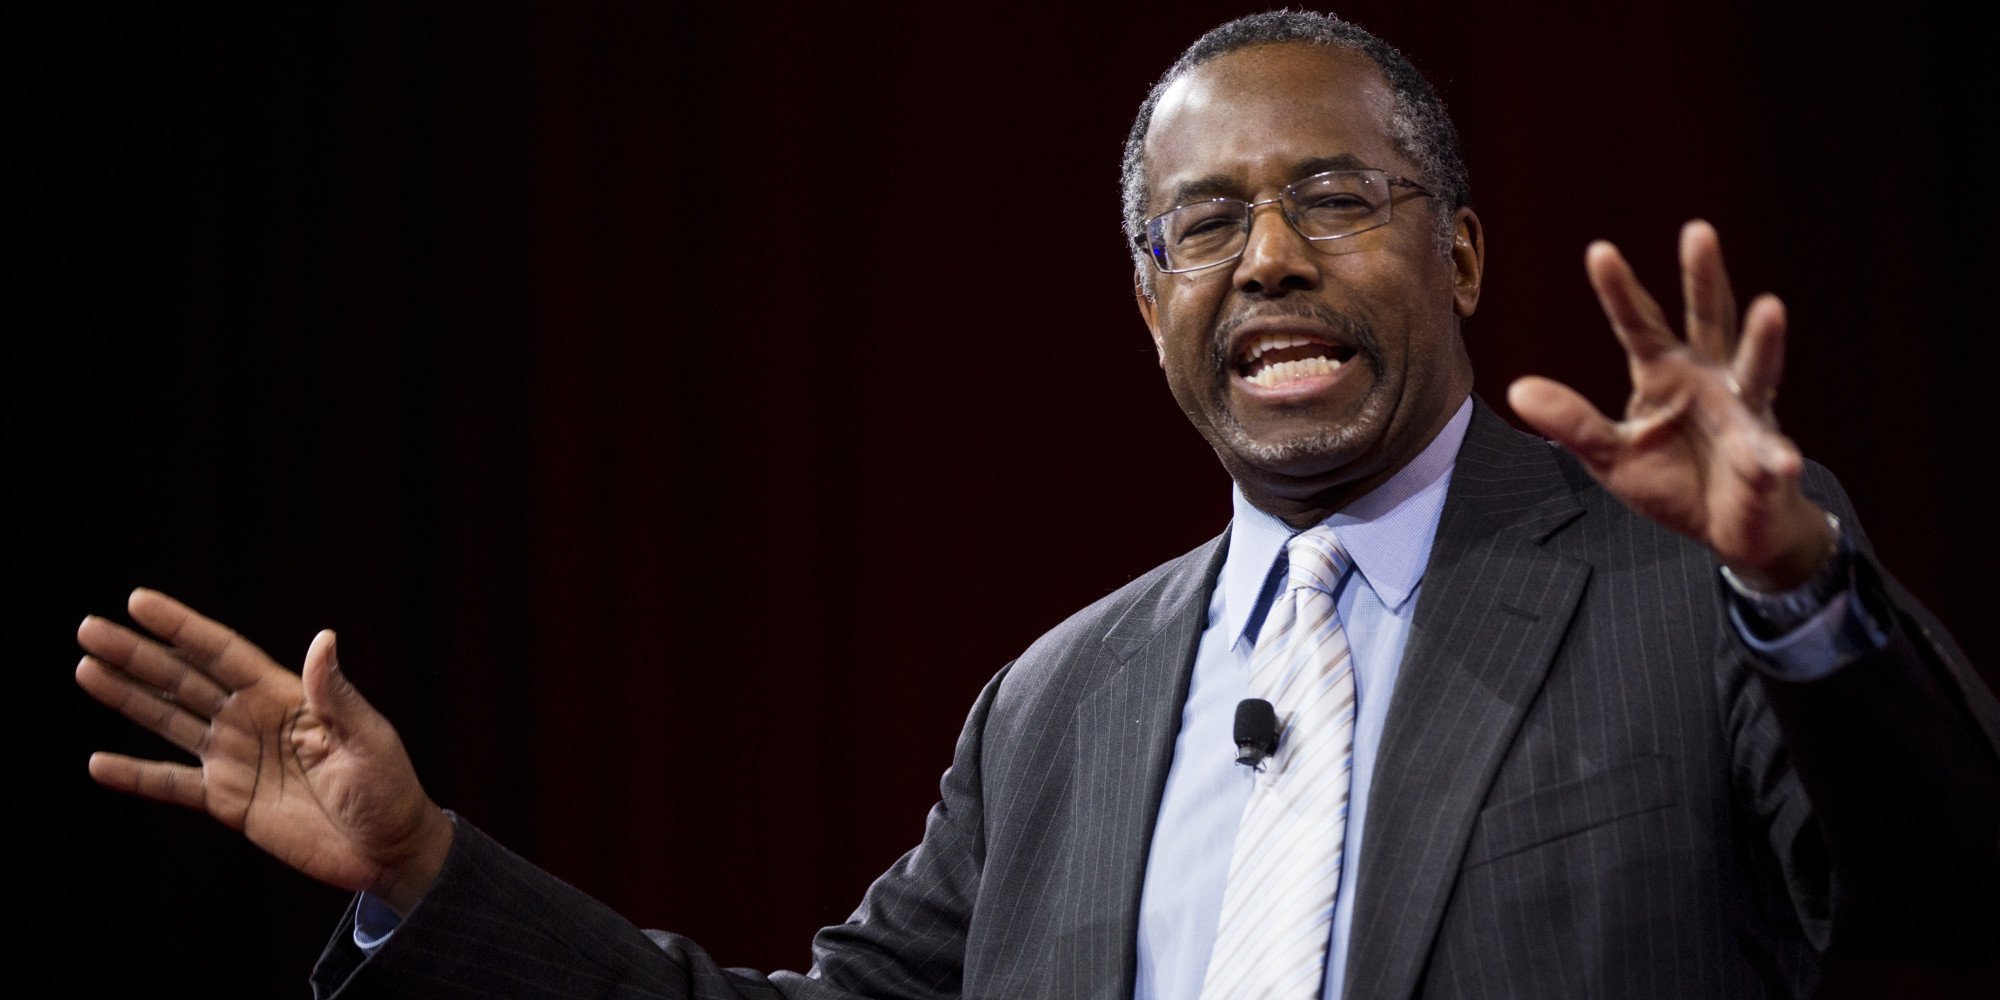 Ben Carson Supporters Gear Up For A Presidential Campaign